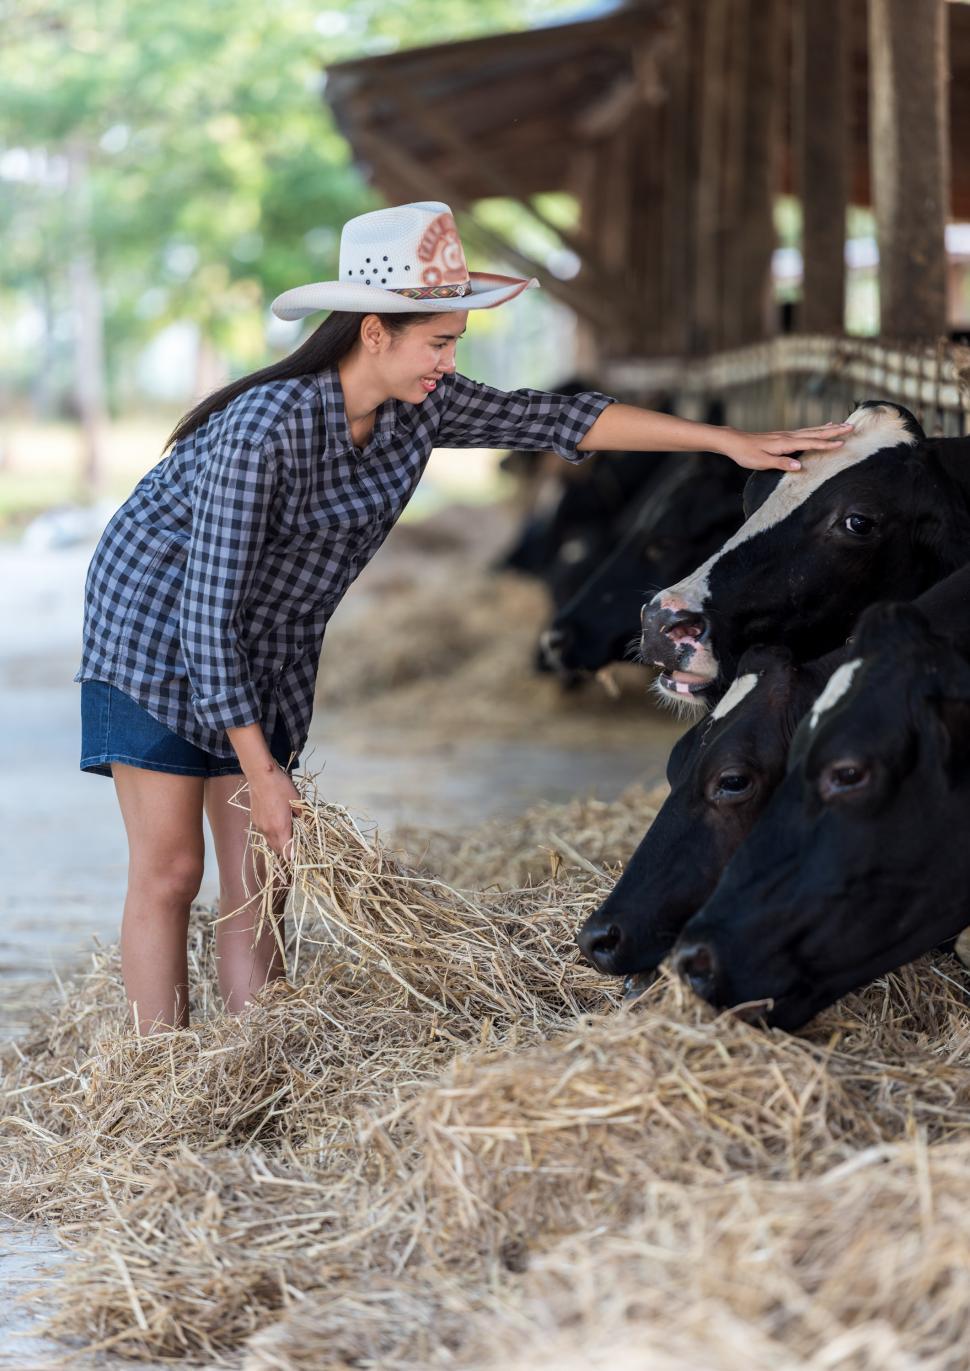 Free Image of Woman in Cowboy Hat Tending to Cows 